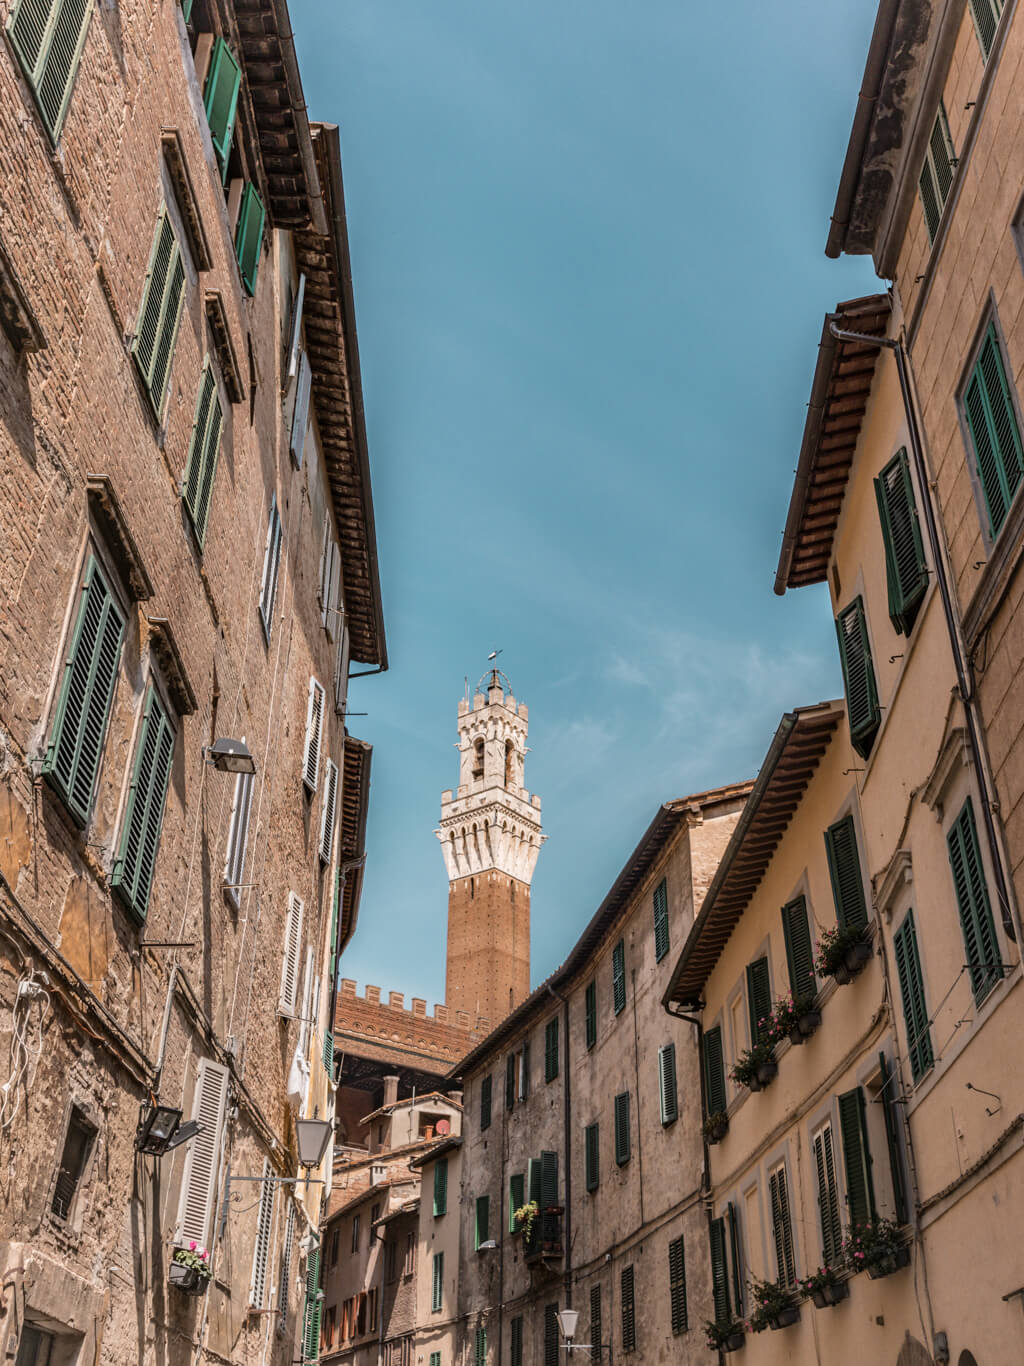 Sienna || A Guide For Planning A Trip To Tuscany, Italy - Things to do, including food & restaurants tips, wineries, and road trip tips